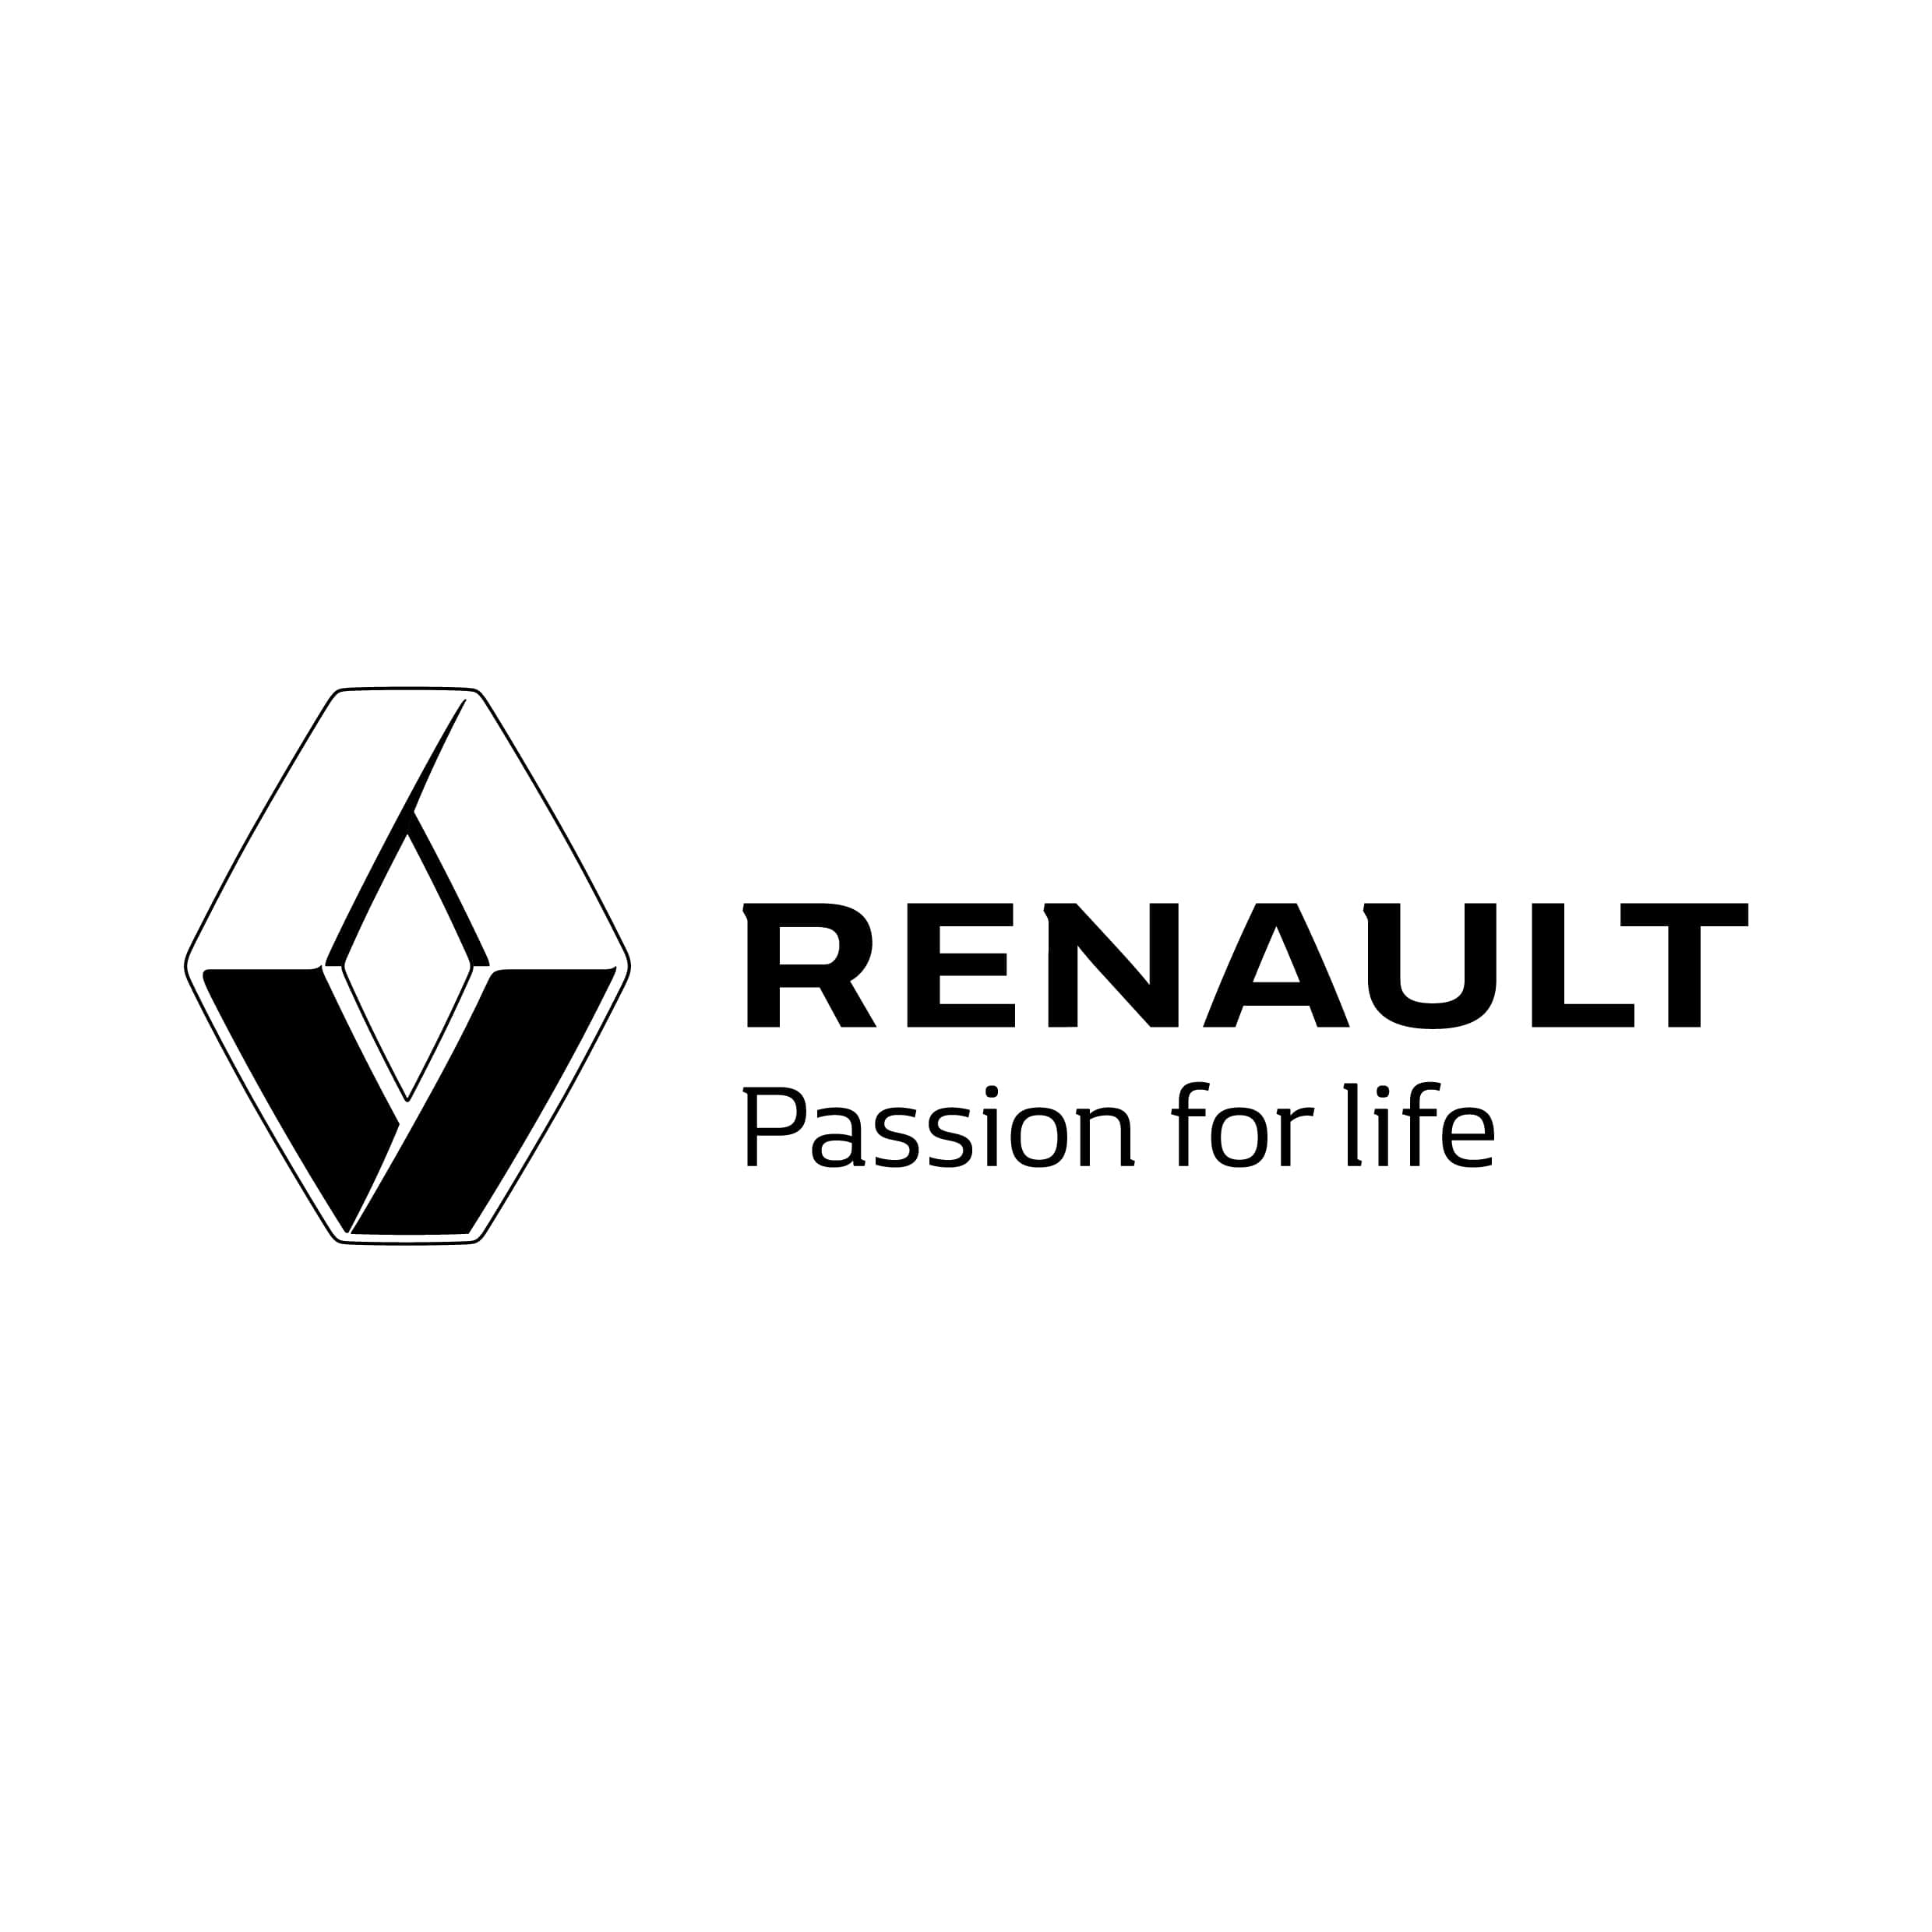 stickers-renault-passion-for-life-ref113-autocollant-voiture-sticker-auto-autocollants-decals-sponsors-racing-tuning-sport-logo-min